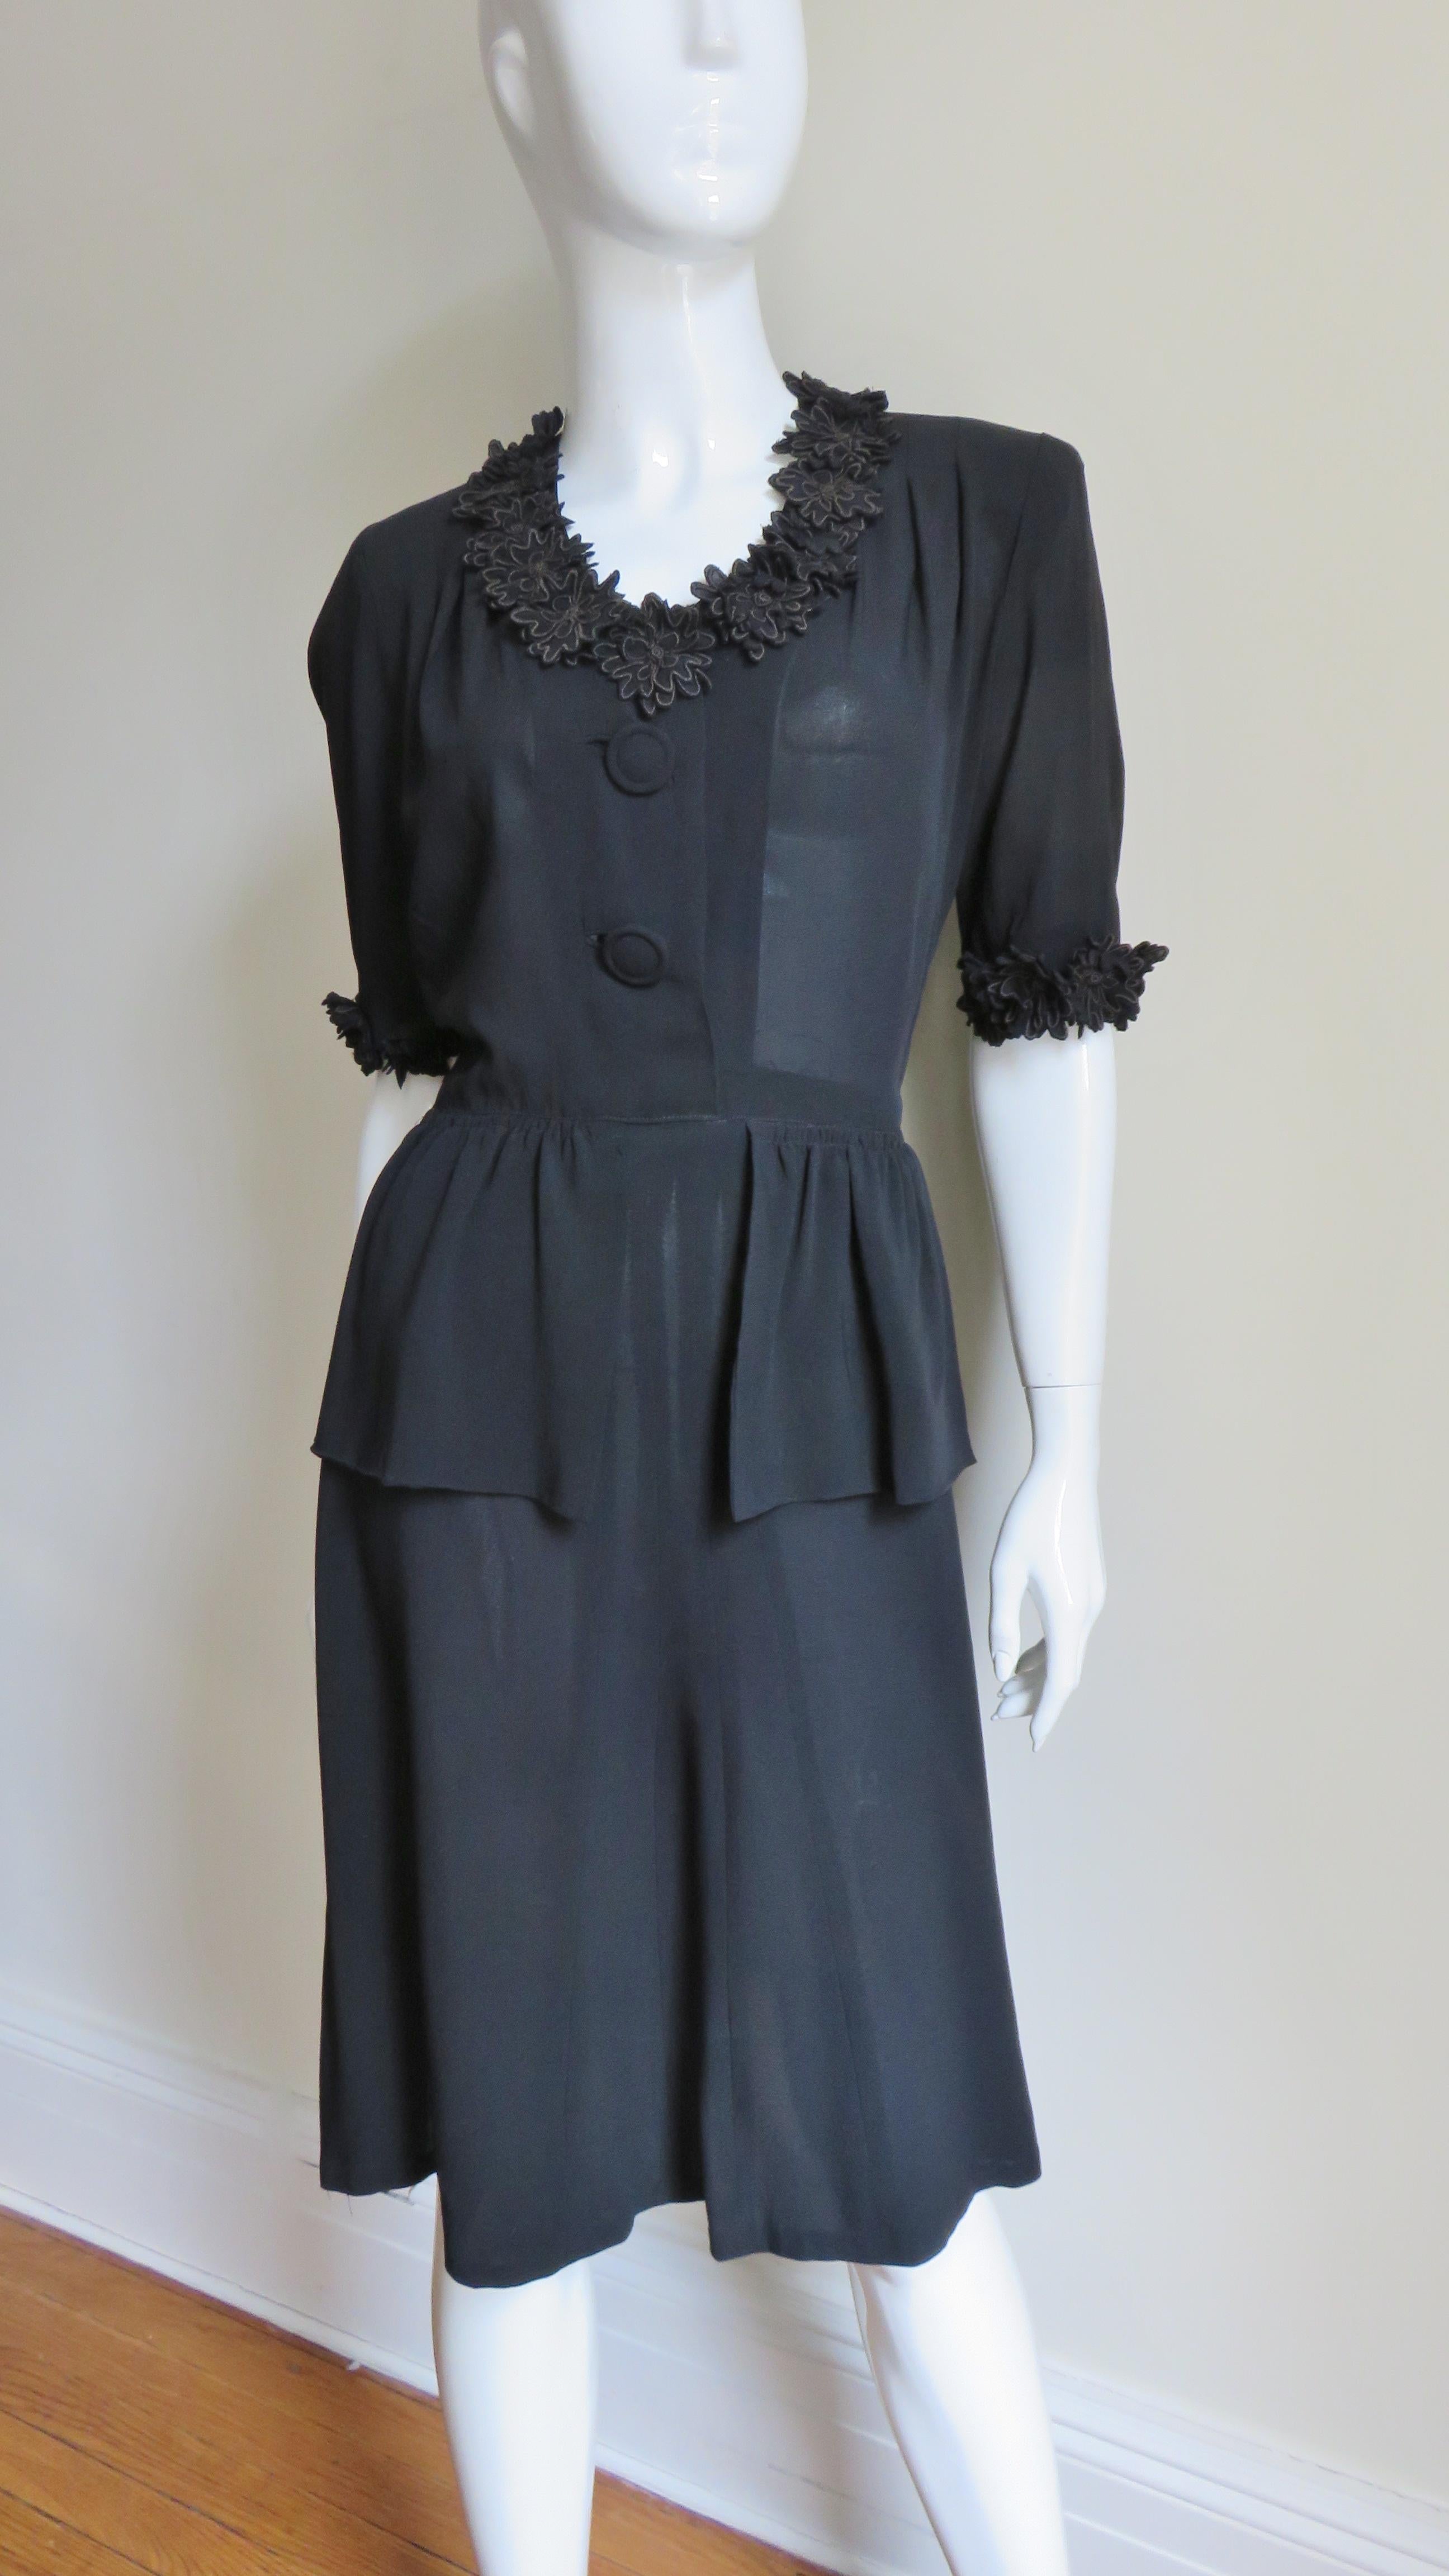 A fabulous little black silk 1940s dress. It has a V neckline, elbow length sleeves, shoulder pads and a front peplum on the A line skirt. The bodice front has 2 self covered buttons and bound buttonholes.  The incredible detail includes dozens of